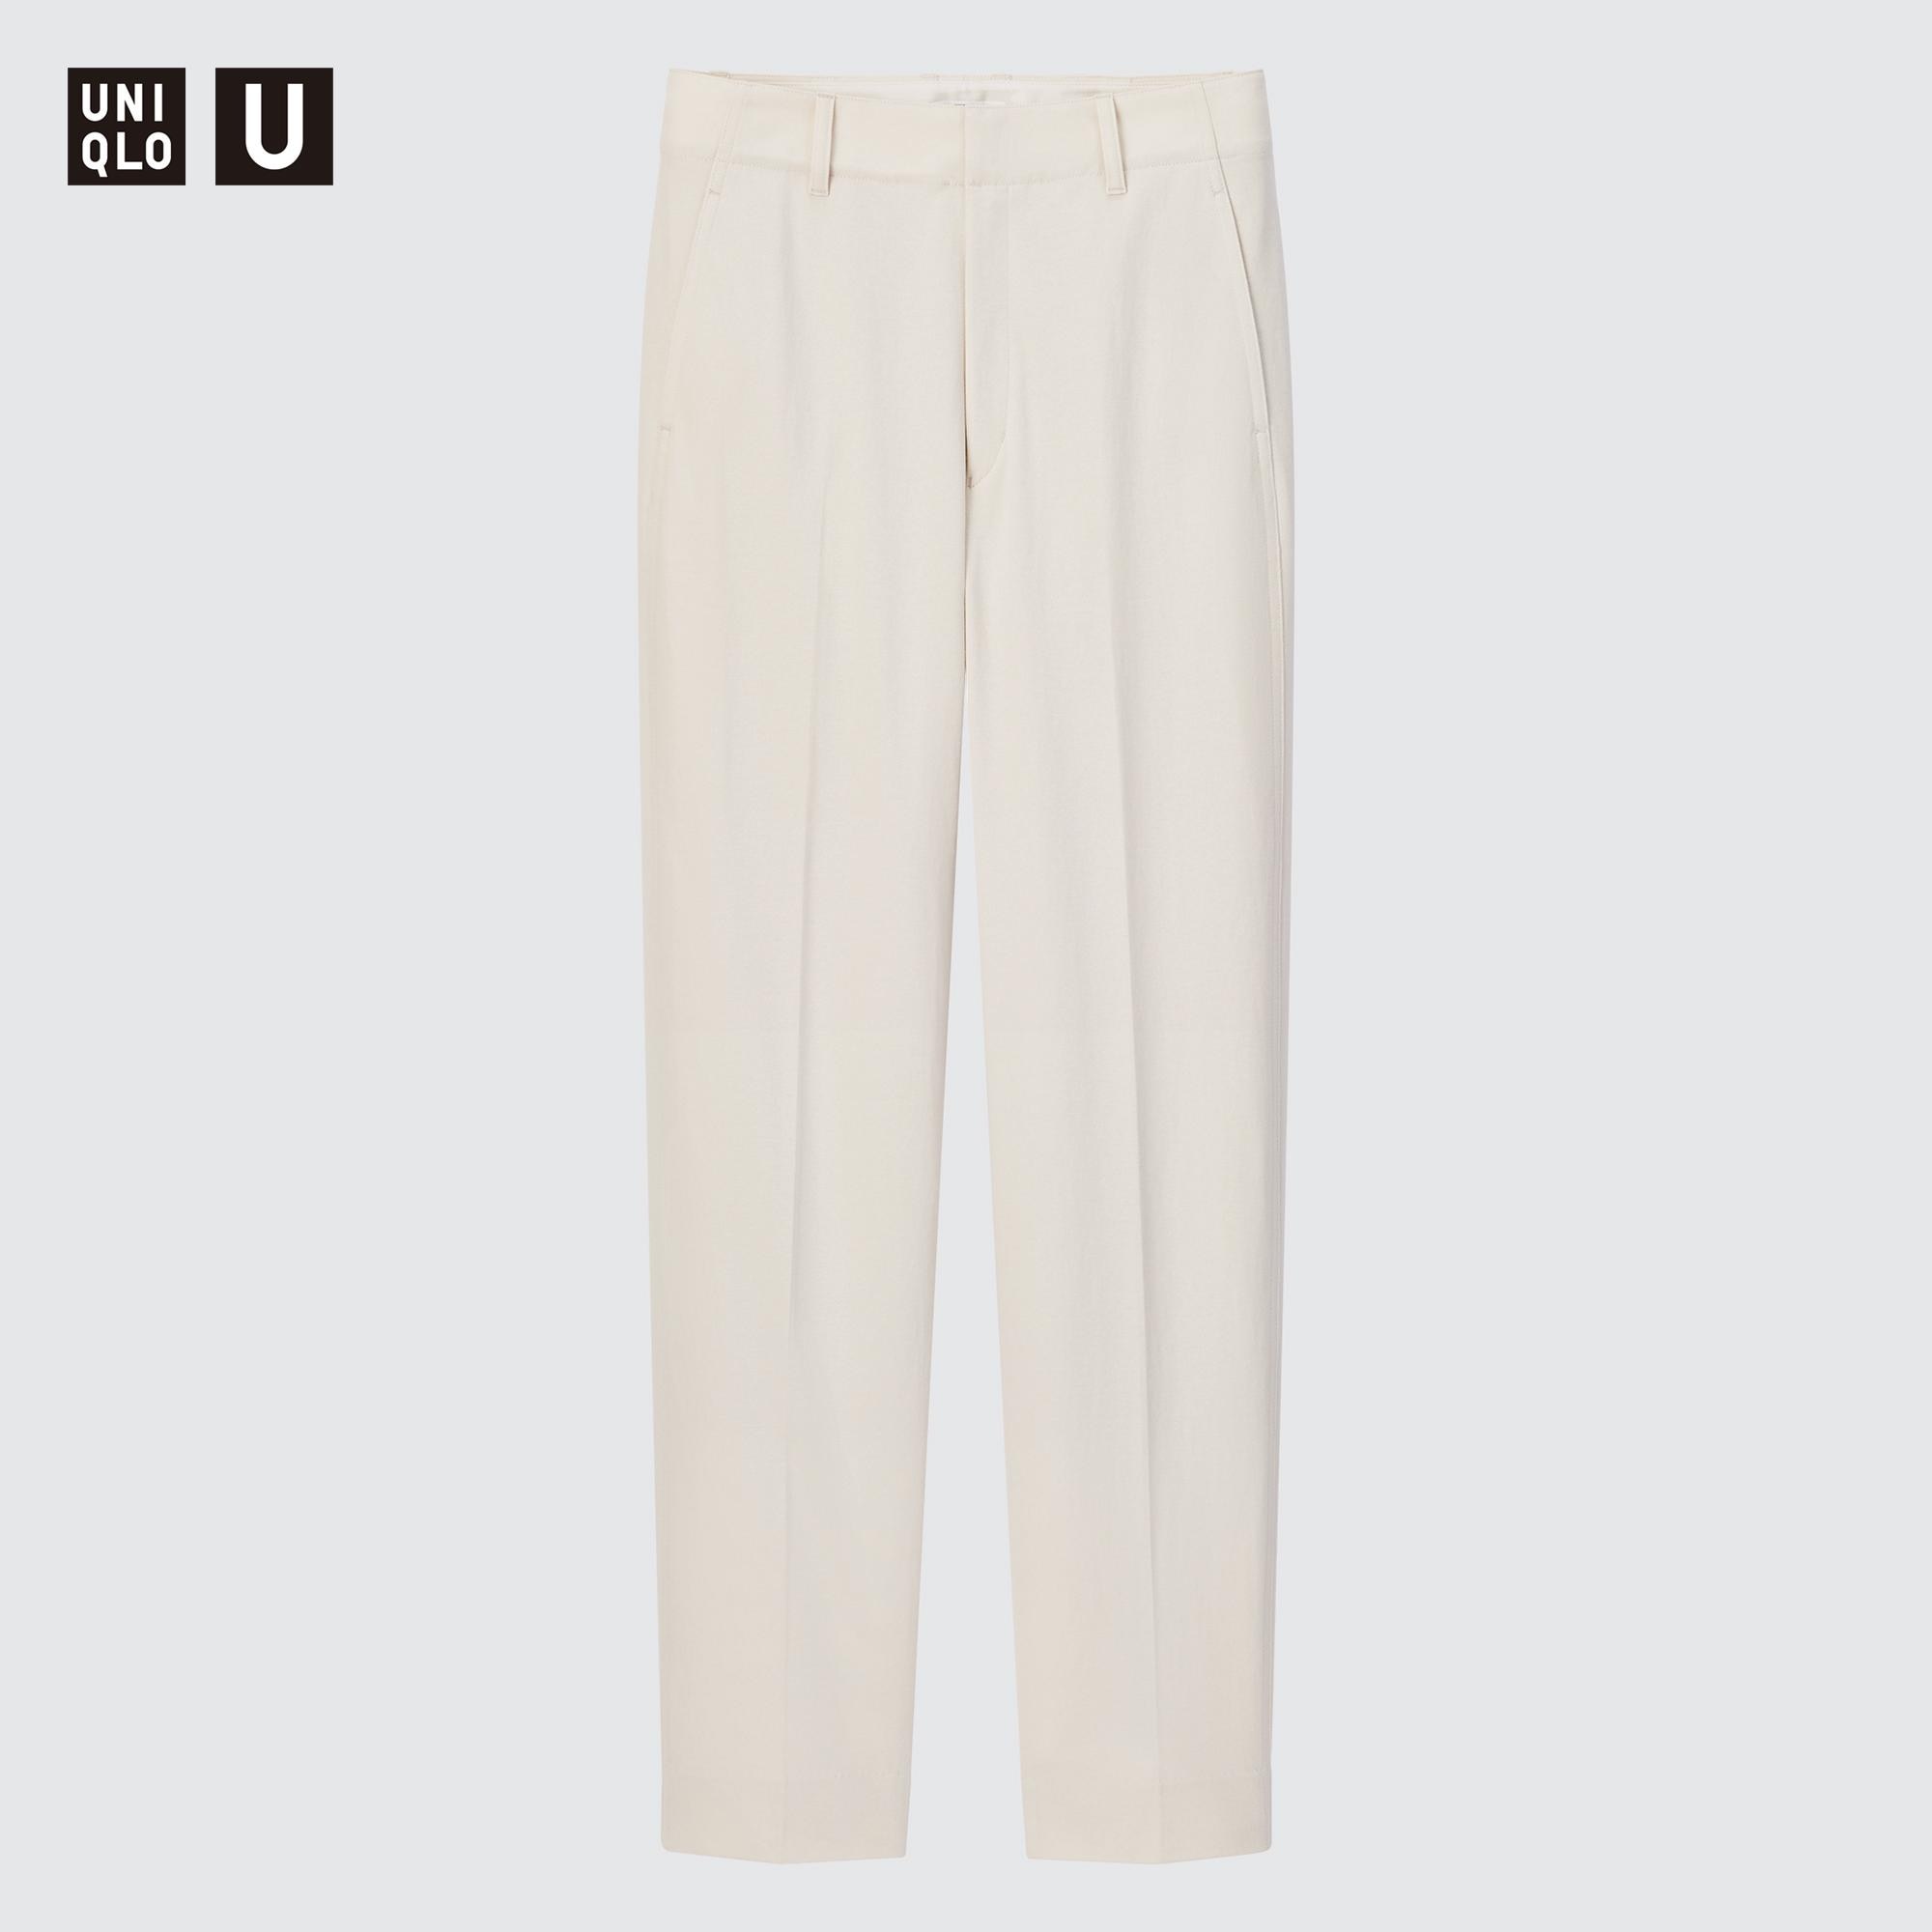 ANN1850: uniqlo women L size stright cut smart ankle pants/ uniqlo stripes  ezy ankle trousers, Women's Fashion, Bottoms, Other Bottoms on Carousell